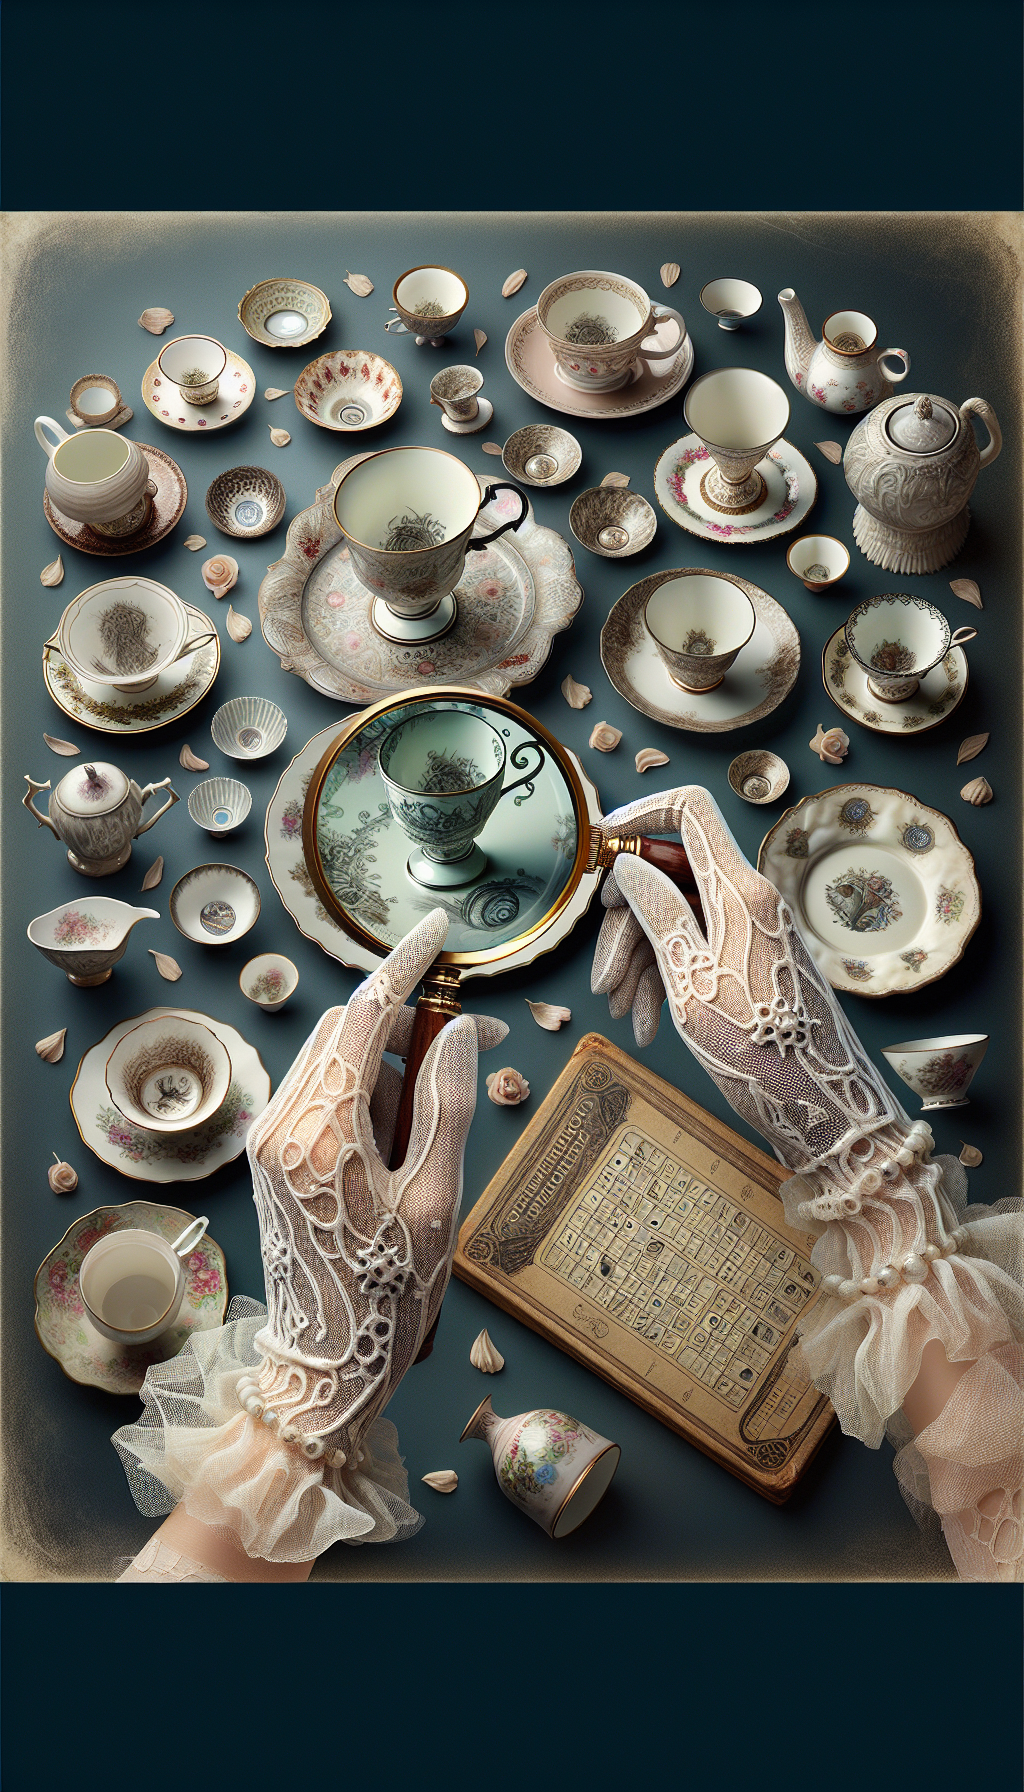 An elegant hand, wearing a delicate, lacy glove, gracefully holds an ornate antique tea cup, showing its unique bottom marking through a magnifying glass. A whimsical assortment of carefully placed cups and saucers, each with their own intricate designs, encircles a vintage guidebook on identifying antique markings, with a few gentle flower petals scattered to symbolize tender care.